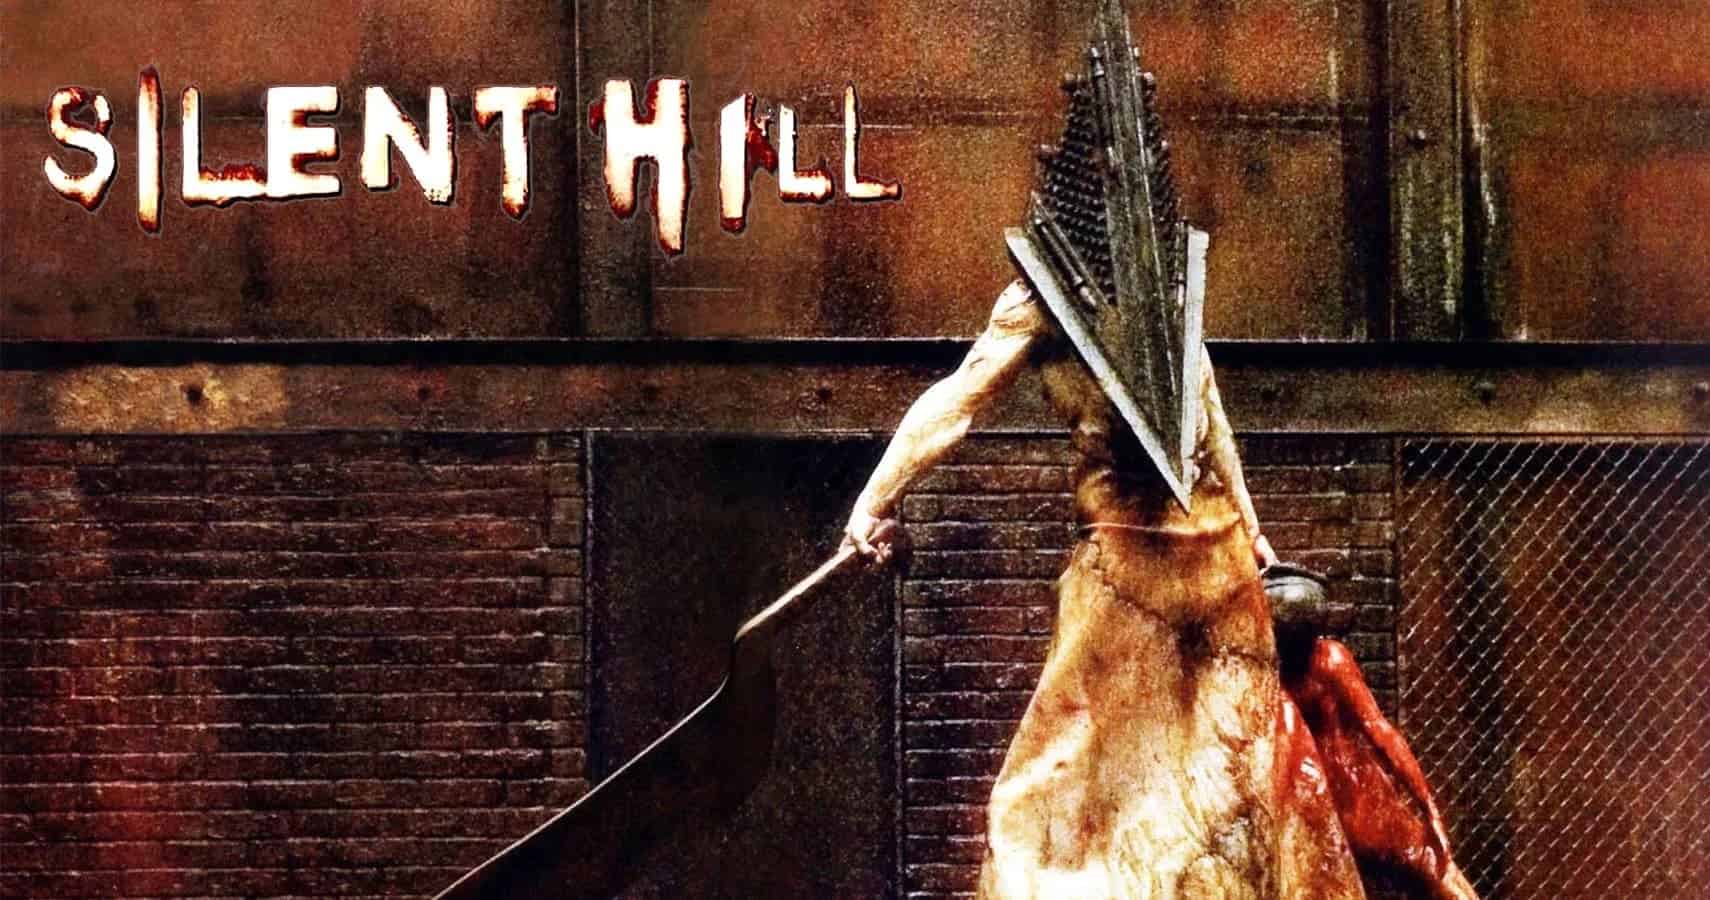 Masahiro Ito Confirms He is Working on a New Silent Hill Game